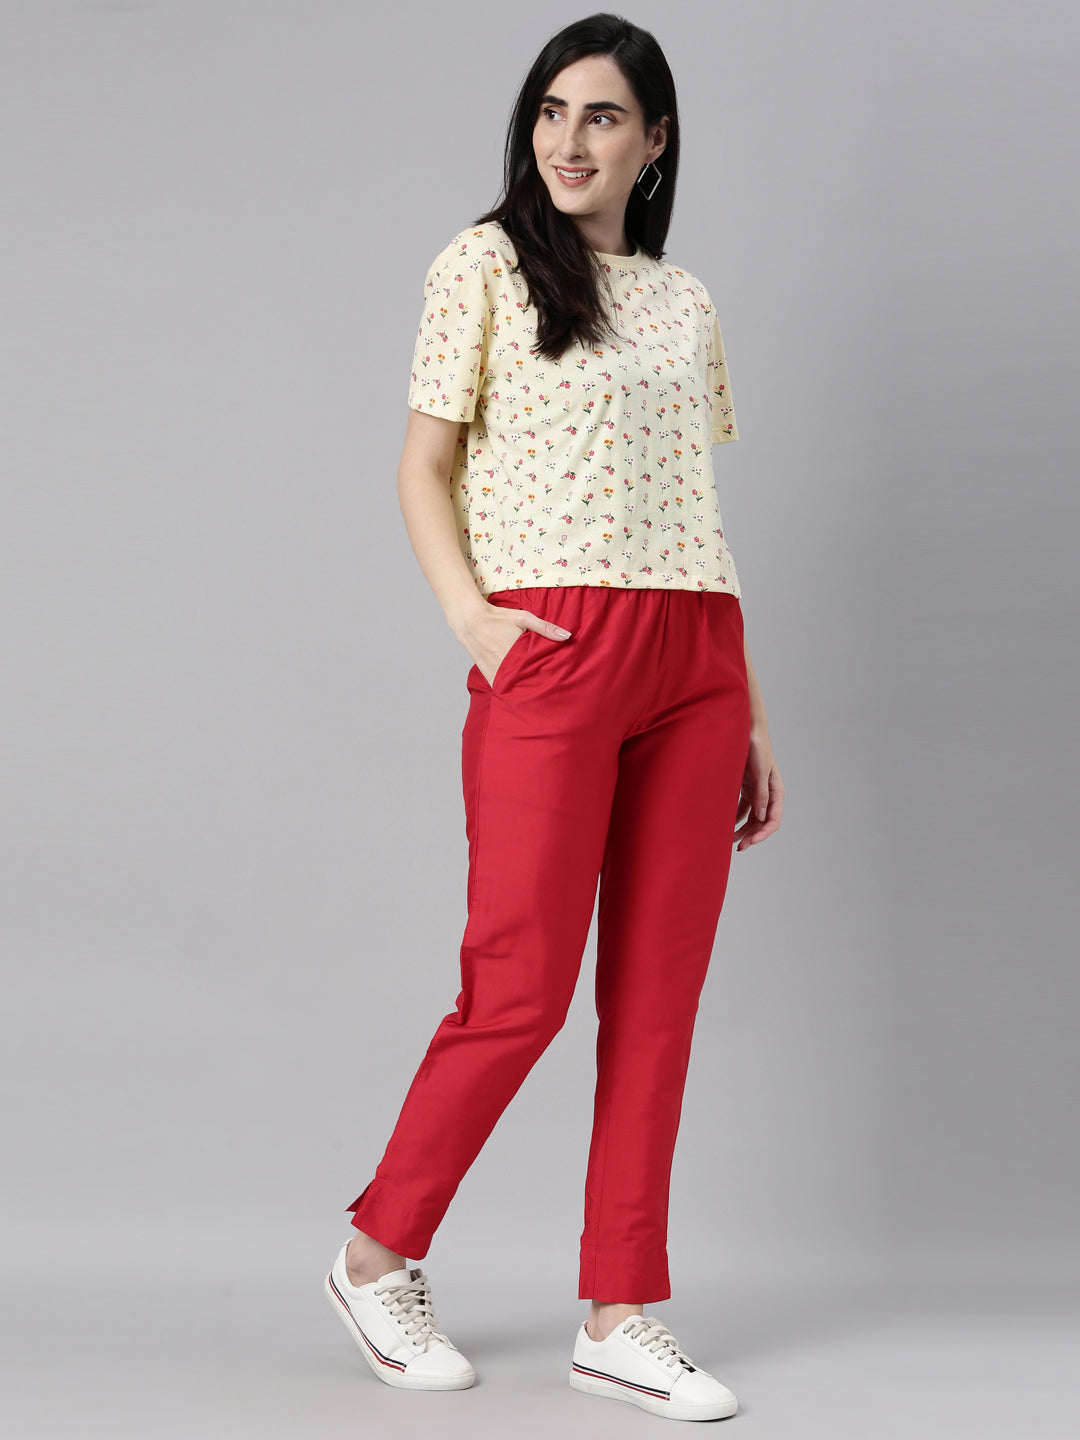 GO COLORS Relaxed Women Beige Trousers - Buy GO COLORS Relaxed Women Beige  Trousers Online at Best Prices in India | Flipkart.com